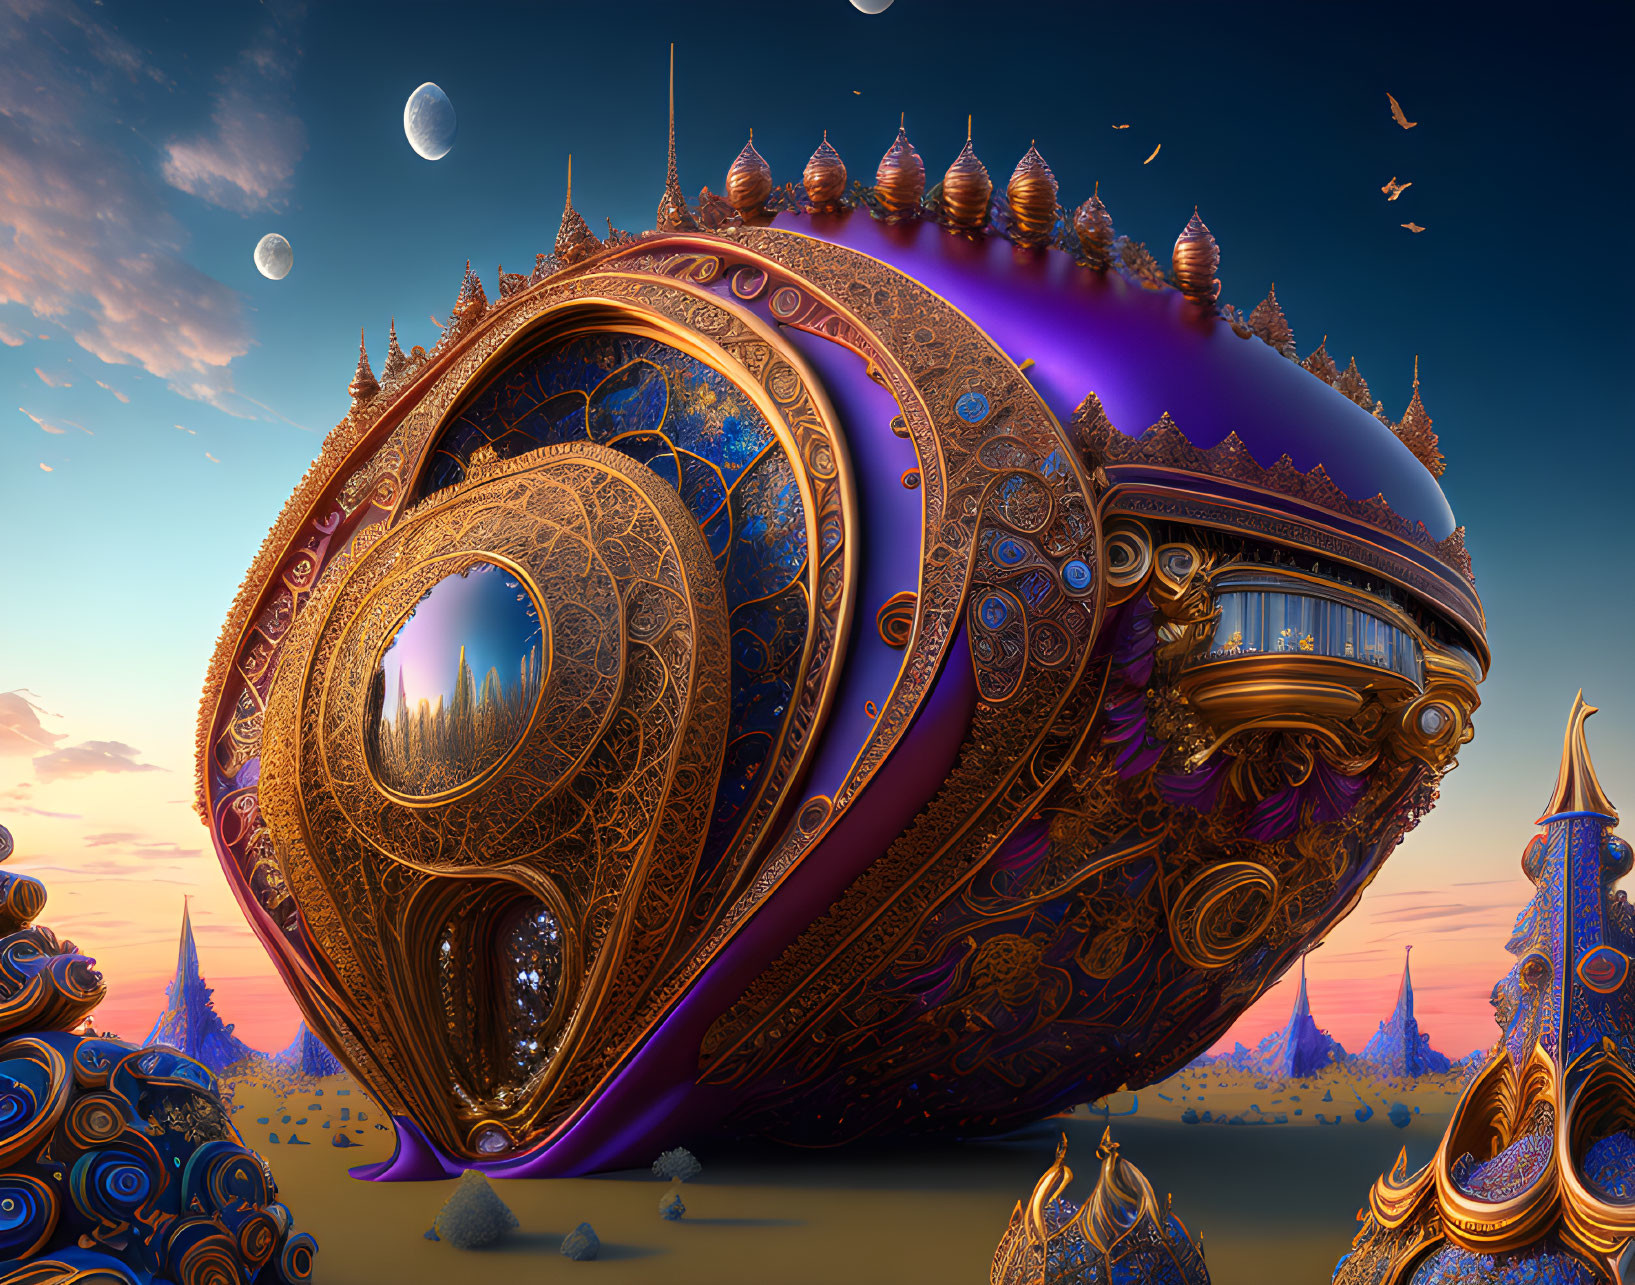 Fantastical ornate airship in a sky with multiple moons